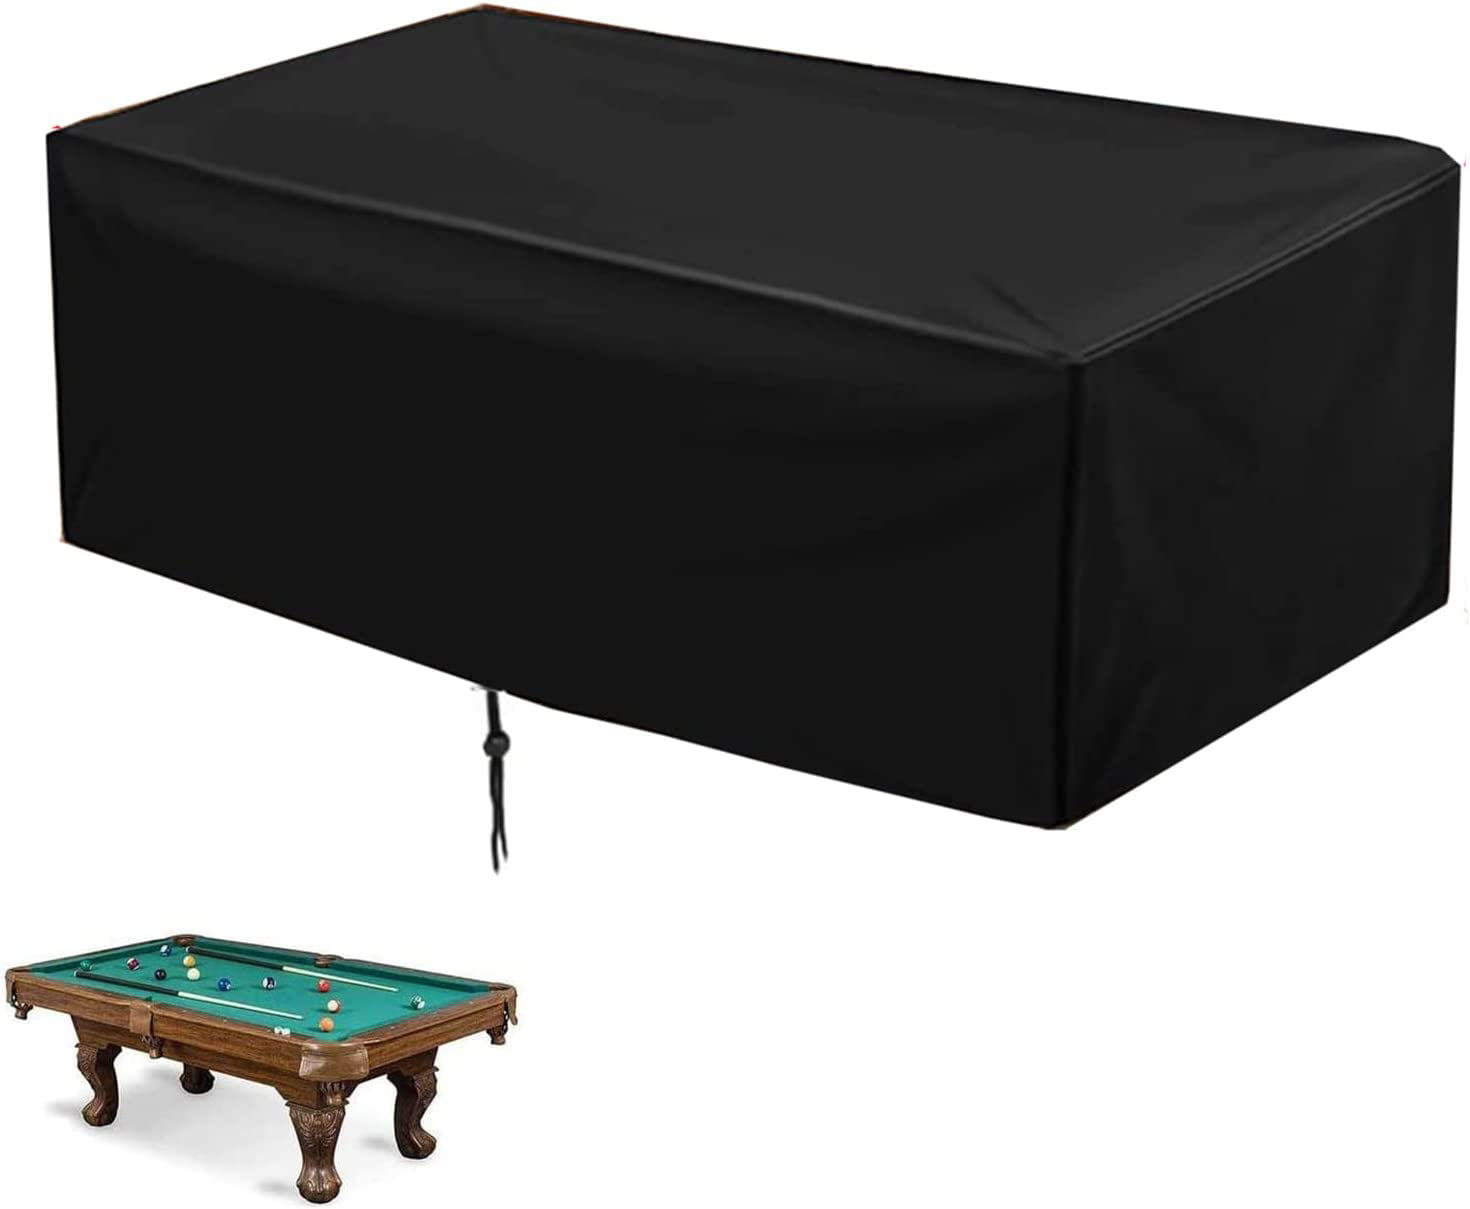 7/8/9FT Heavy Duty Leatherette Billiard Pool Table Cover 7/8/9 Foot Fitted Waterproof & UV Protection 